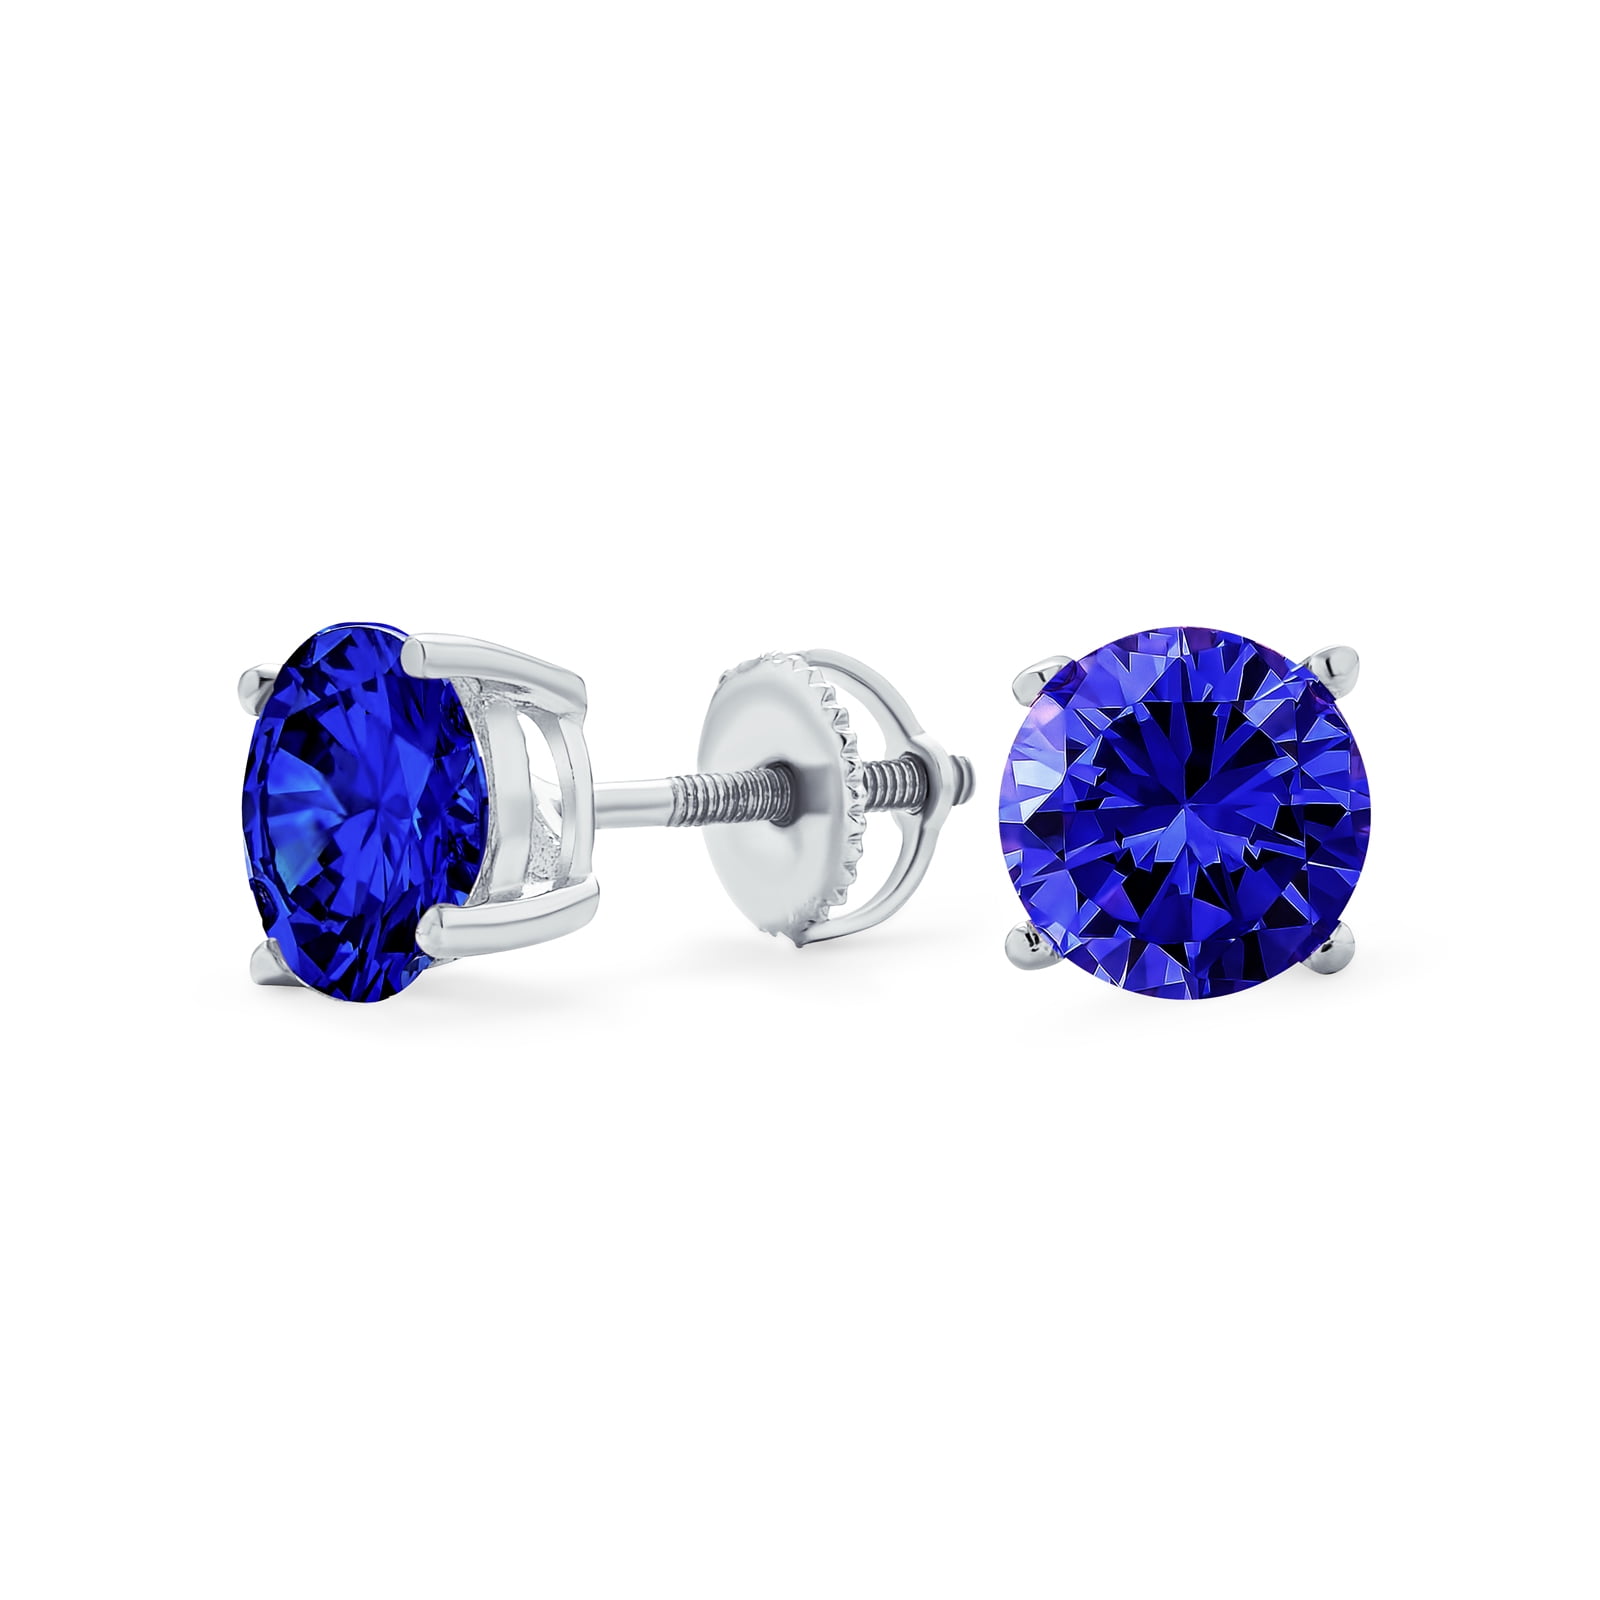 BLUE SAPPHIRE 1.6 MM ROUND ROYAL BLUE COLOR AAA 50 PC SET 